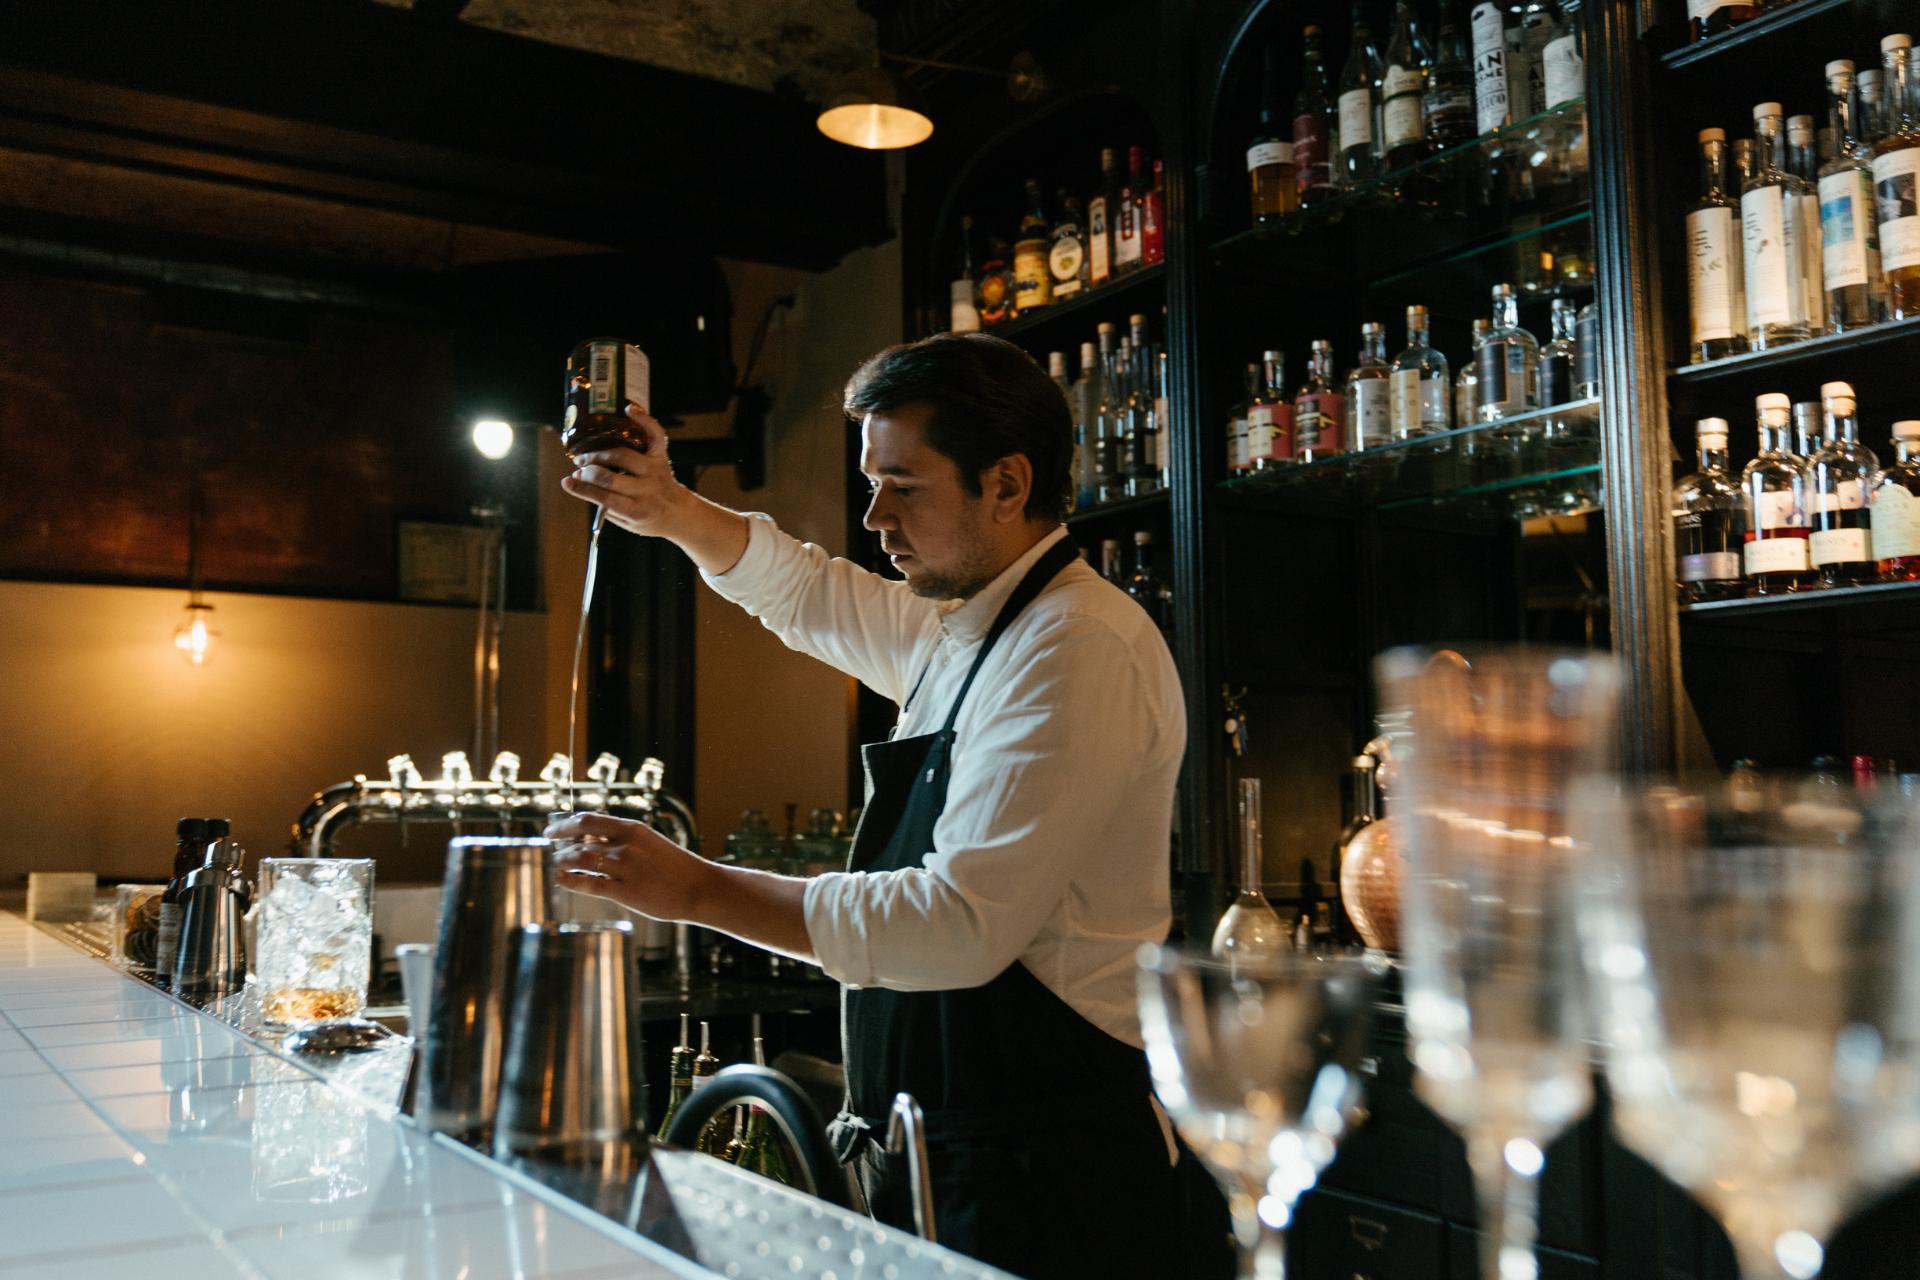 Bartender expertly pouring drink in a bar